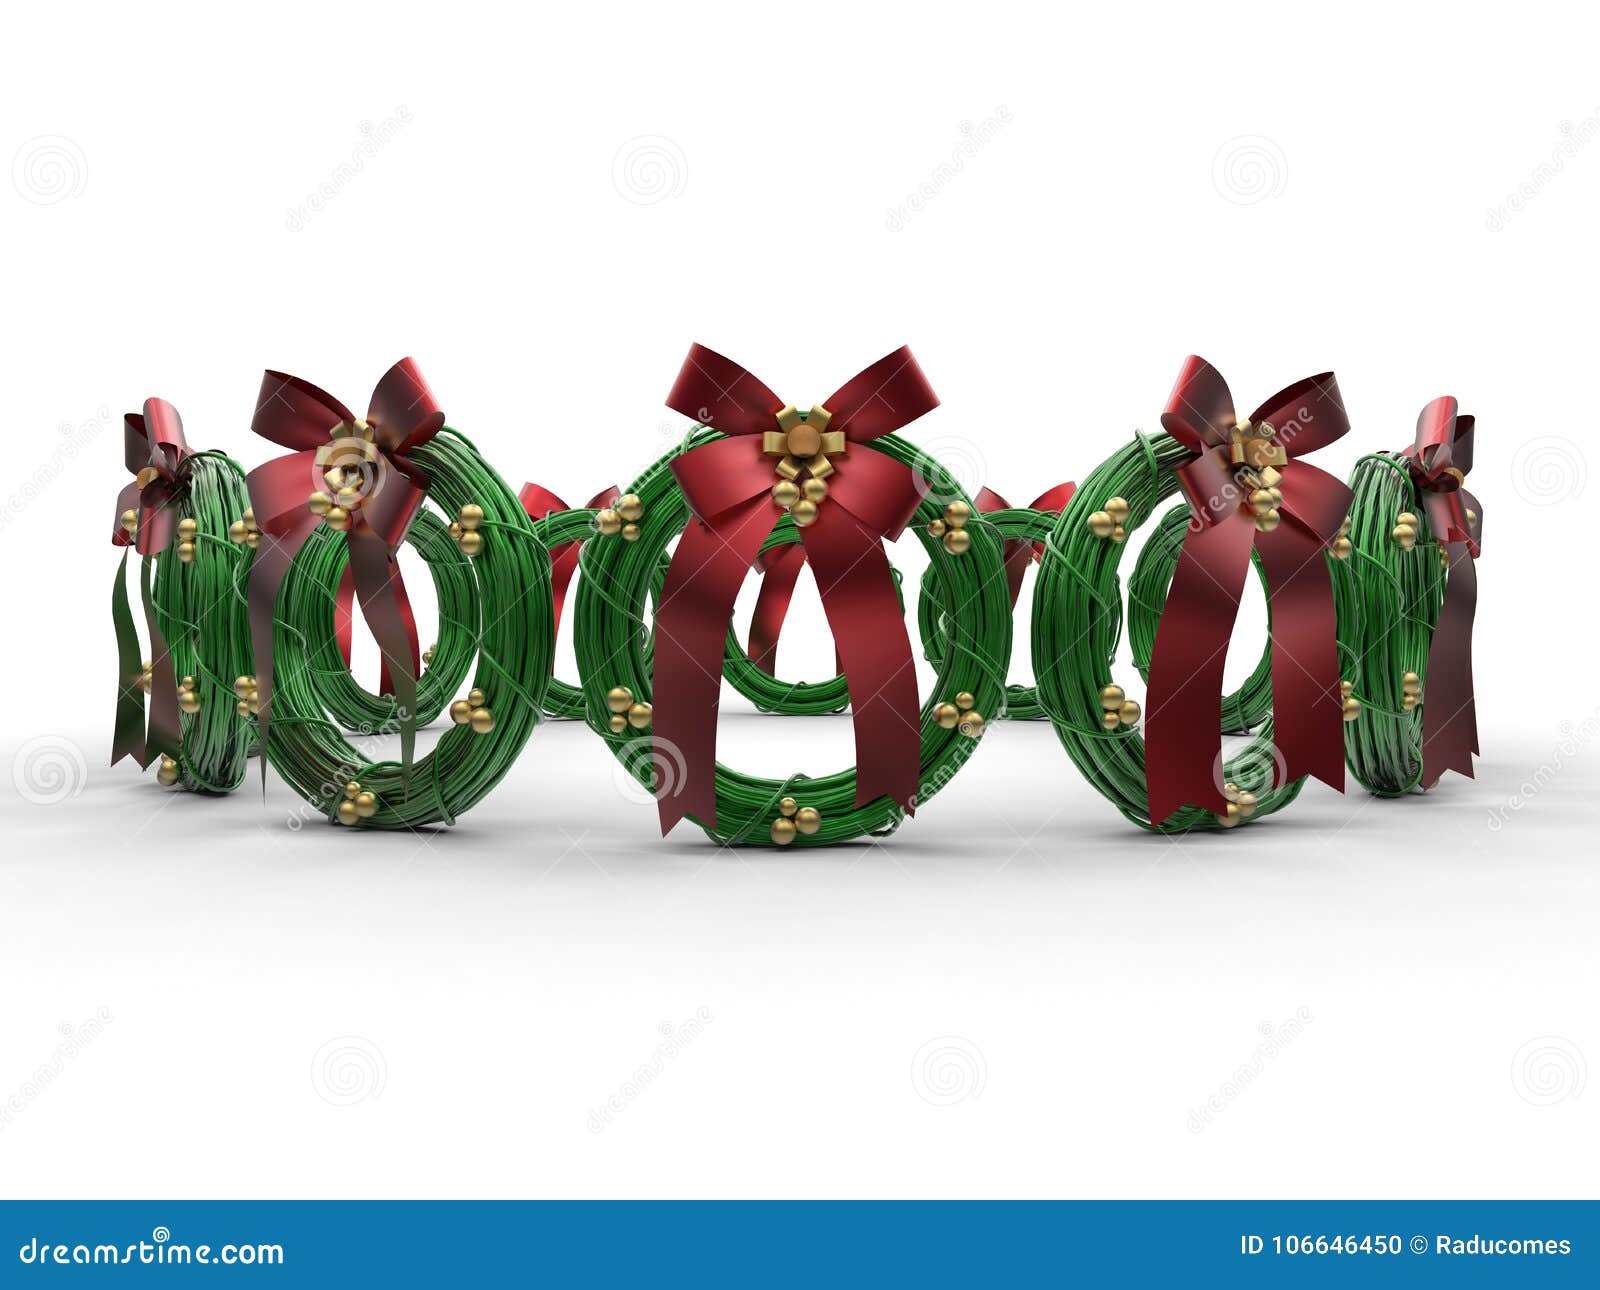 3D render illustration of multiple green Christmas ornaments isolated on a white background with shadows